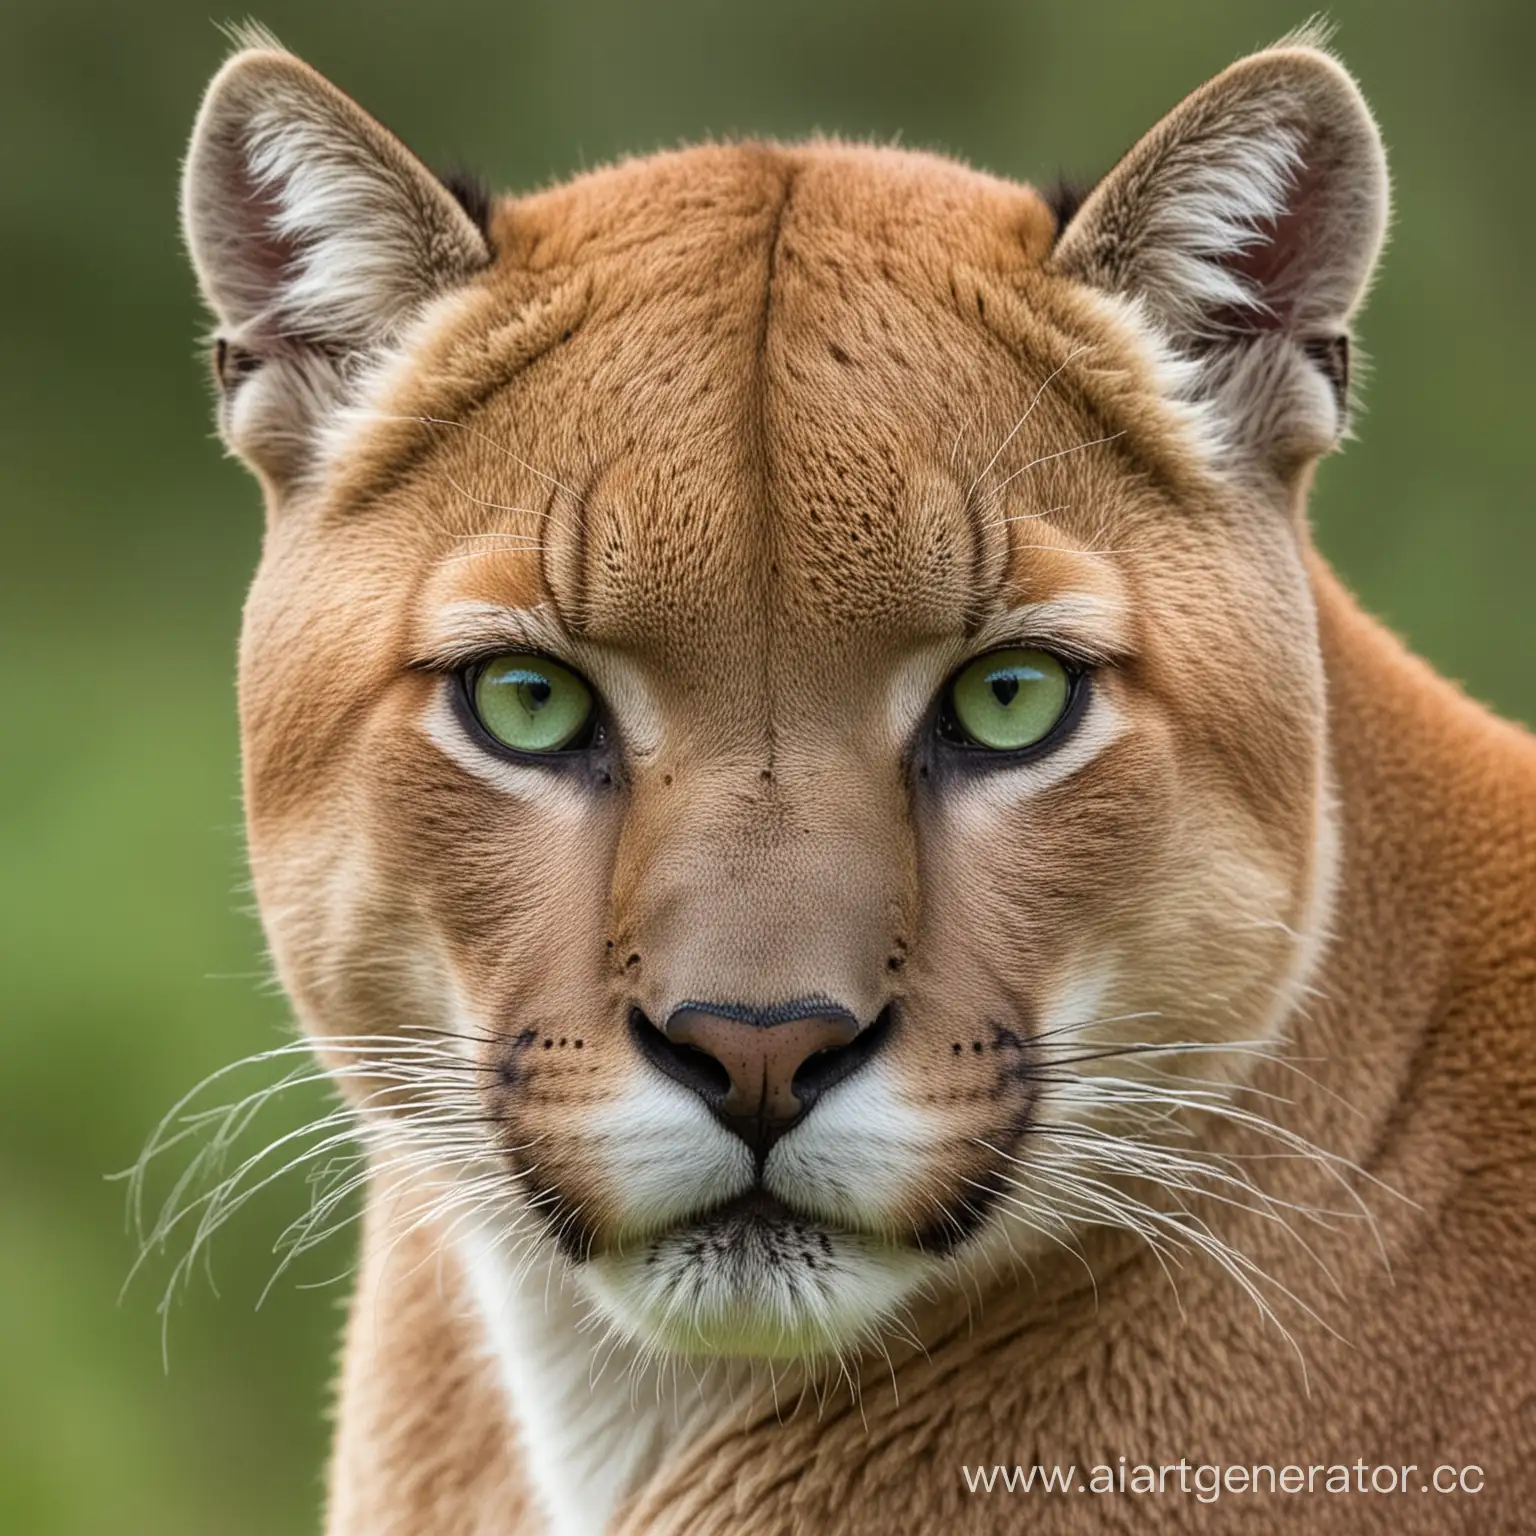 Pumas-Muzzle-with-Green-Eyes-in-Forest-Ambiance